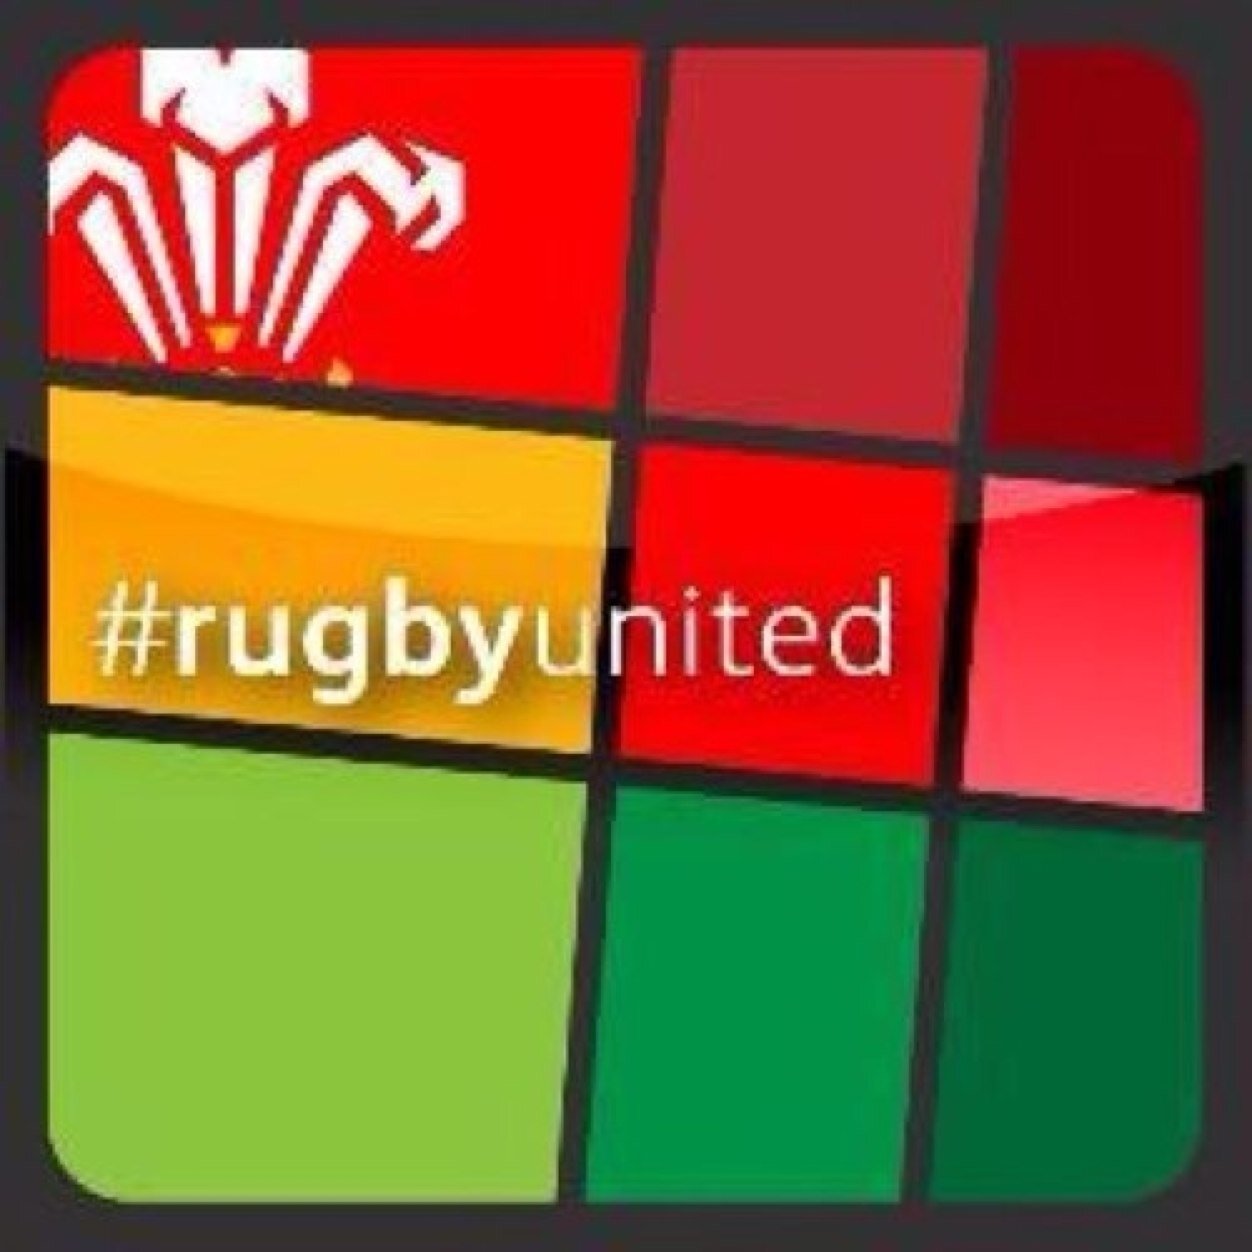 A account dedicated to Welsh Rugby! @WelshRugbyUnion #iamwales E- mail : wales@rugbyunited.com